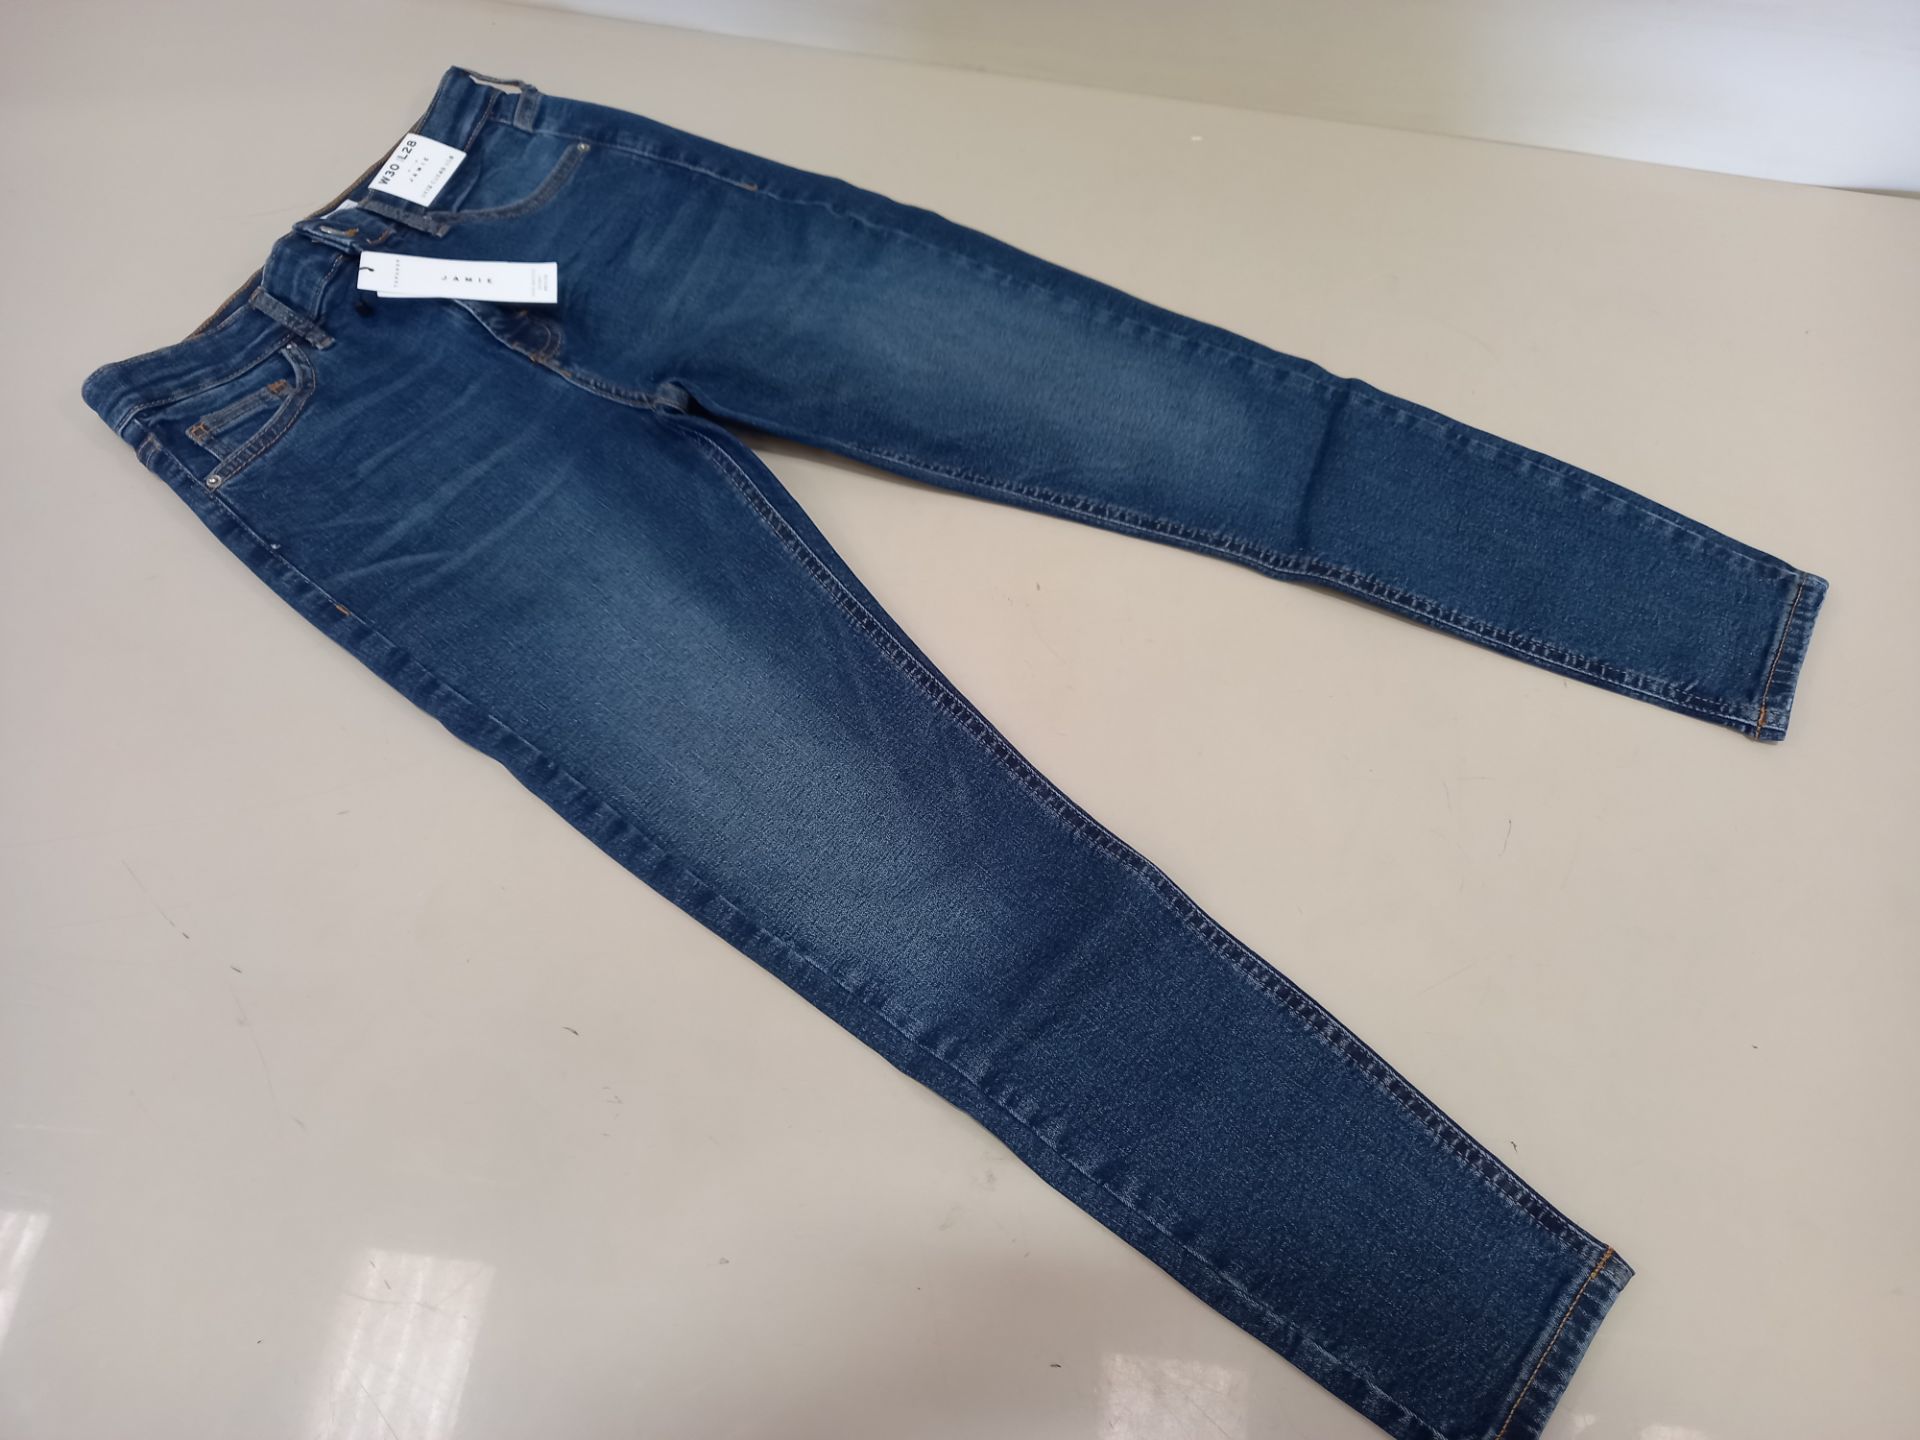 10 X BRAND NEW TOPSHOP JAMIE HIGH WAISTED SKINNY PETITE JEANS UK SIZE 10 RRP £40.00 (TOTAL RRP £